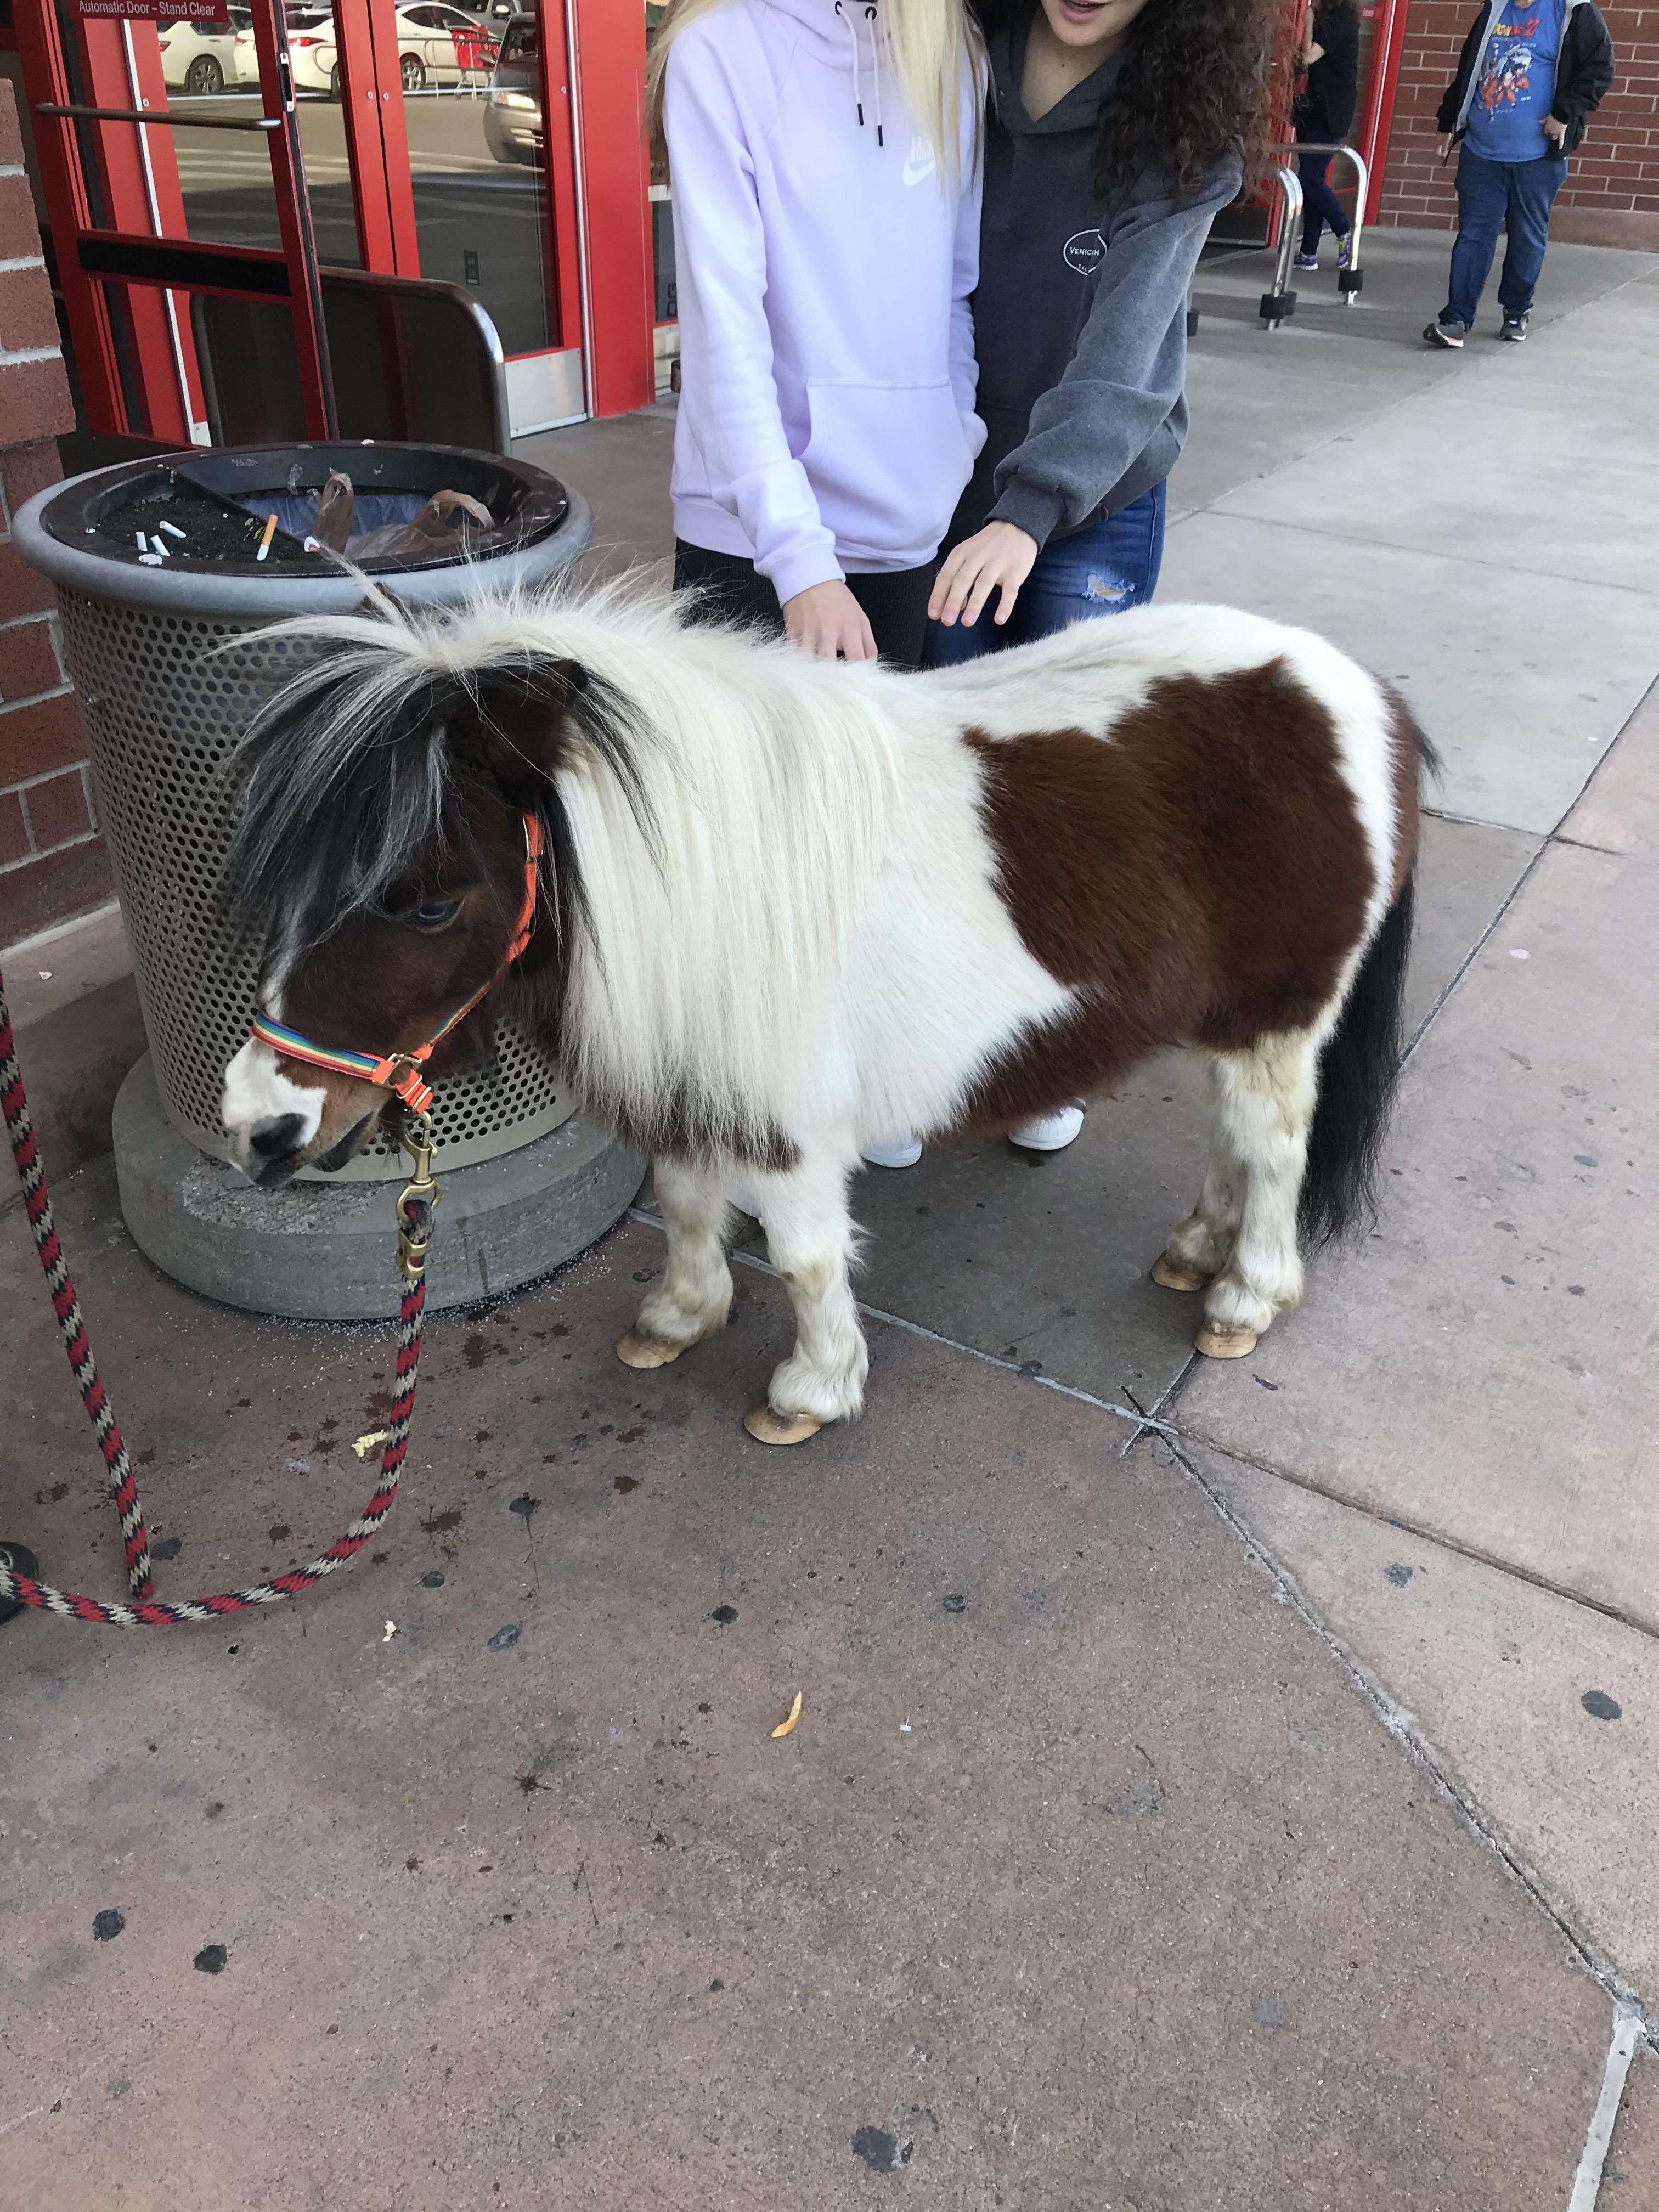 I saw Lil Sebastian at my local target today